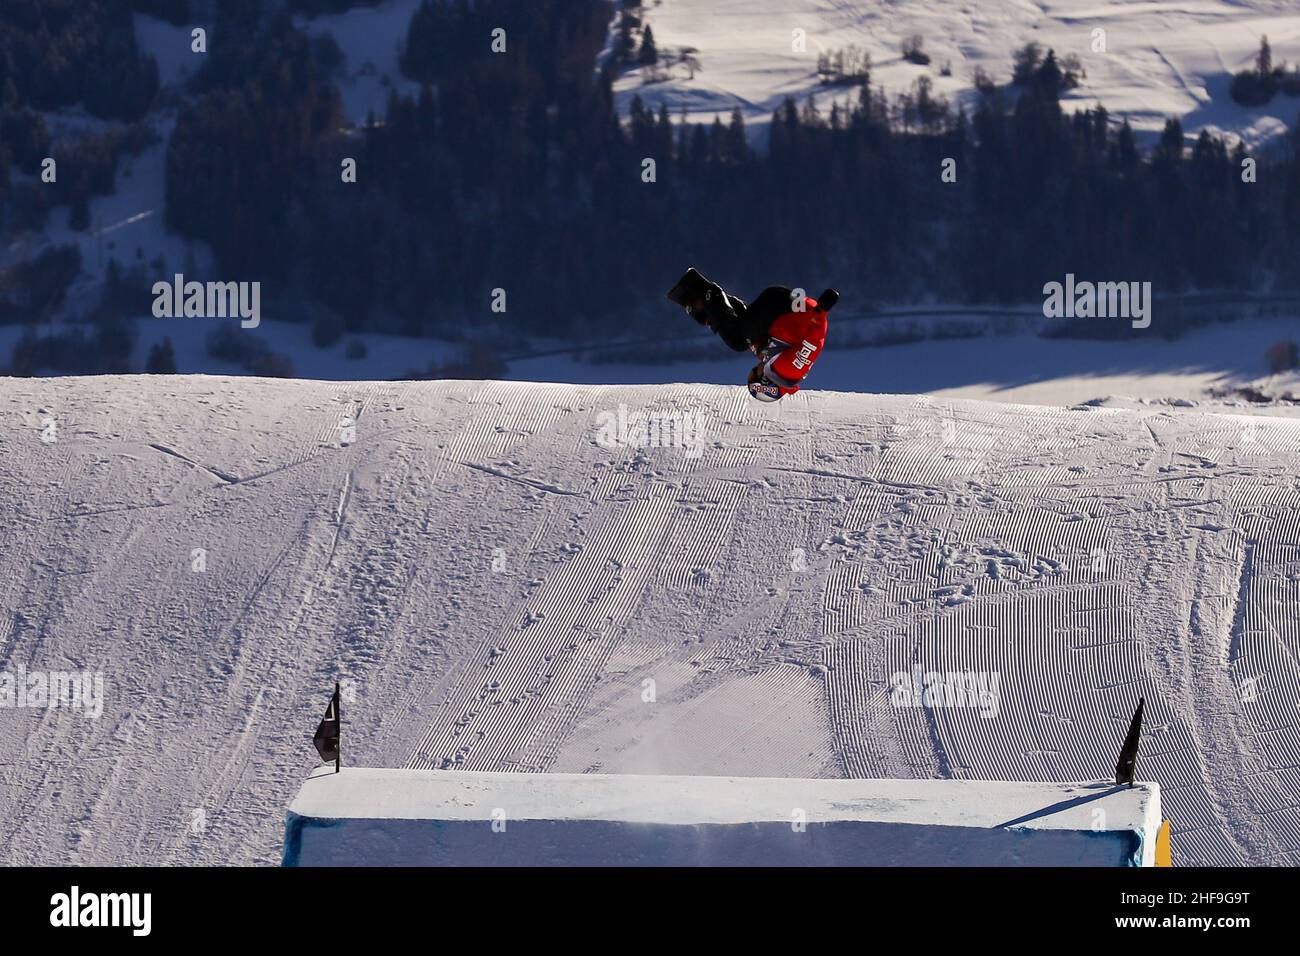 Laax, Switzerland. 14th Jan, 2022. Otsuka Takeru of Japan competes during the men's snowboard slopestyle semifinal at FIS Snowboard World Cup 2022 in Laax, Switzerland, Jan. 14, 2022. Credit: Zhang Cheng/Xinhua/Alamy Live News Stock Photo